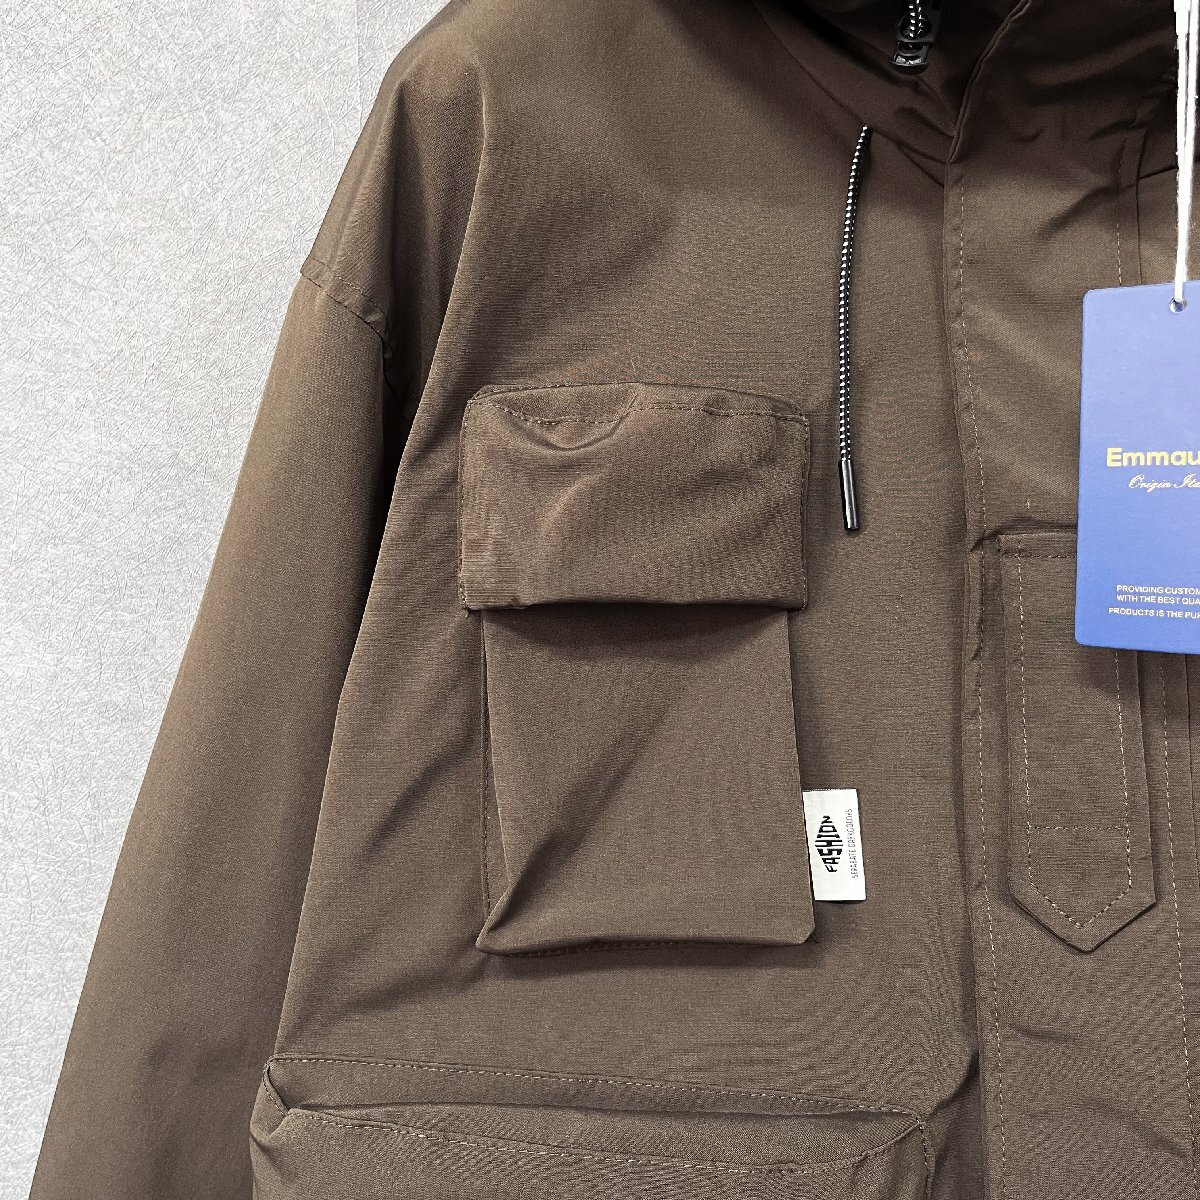  standard * mountain parka regular price 6 ten thousand *Emmauela* Italy * milano departure * high class functionality speed . plain protection against cold . manner outdoor outer men's M/46